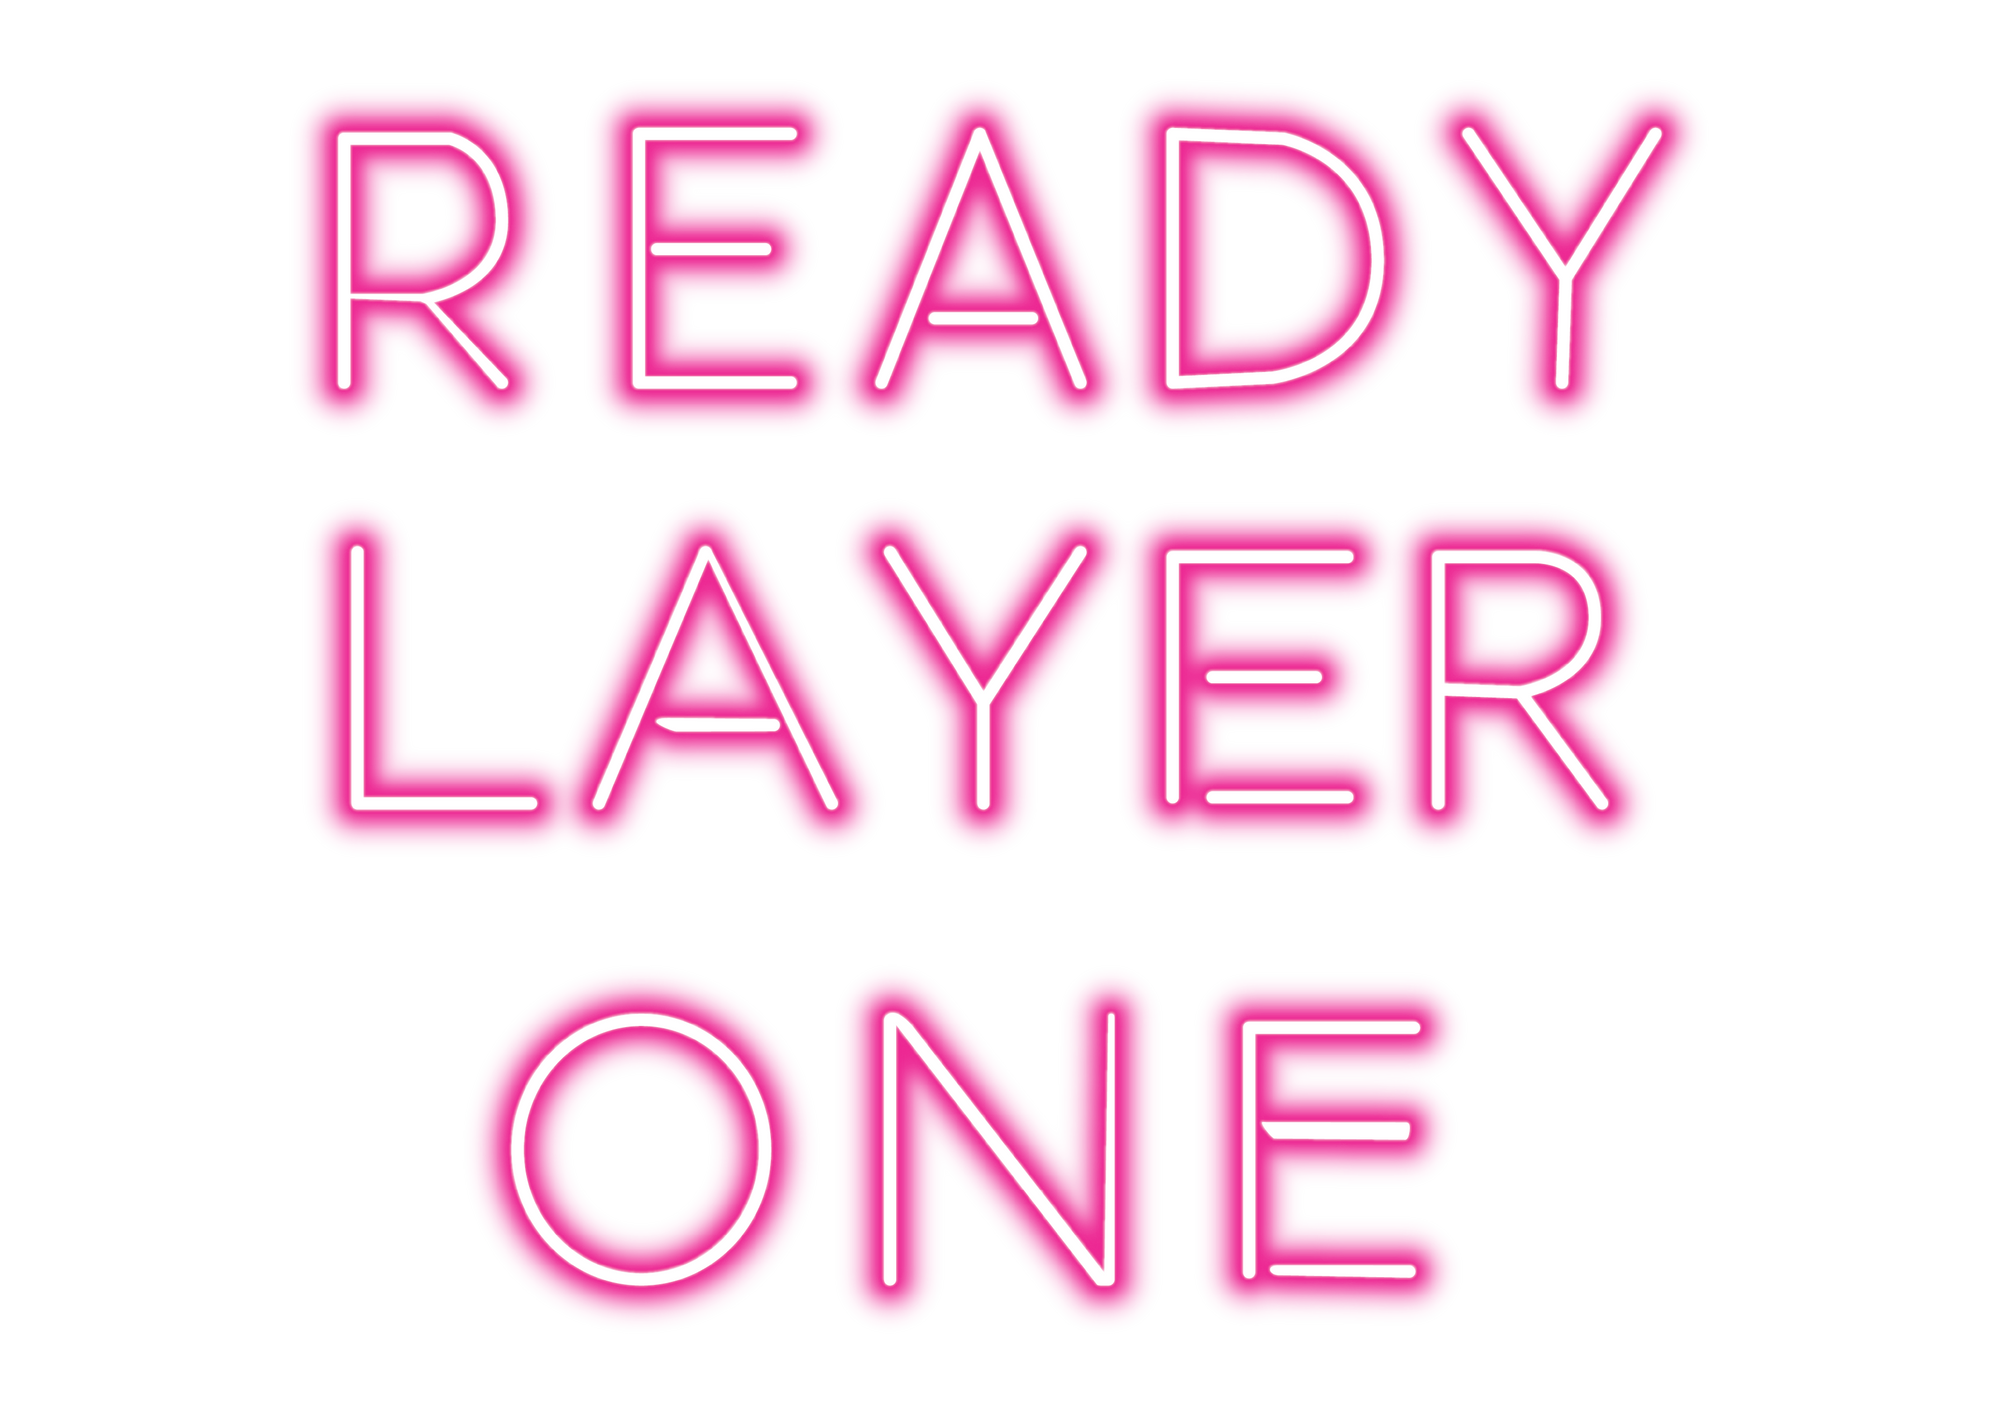 Ready Layer One